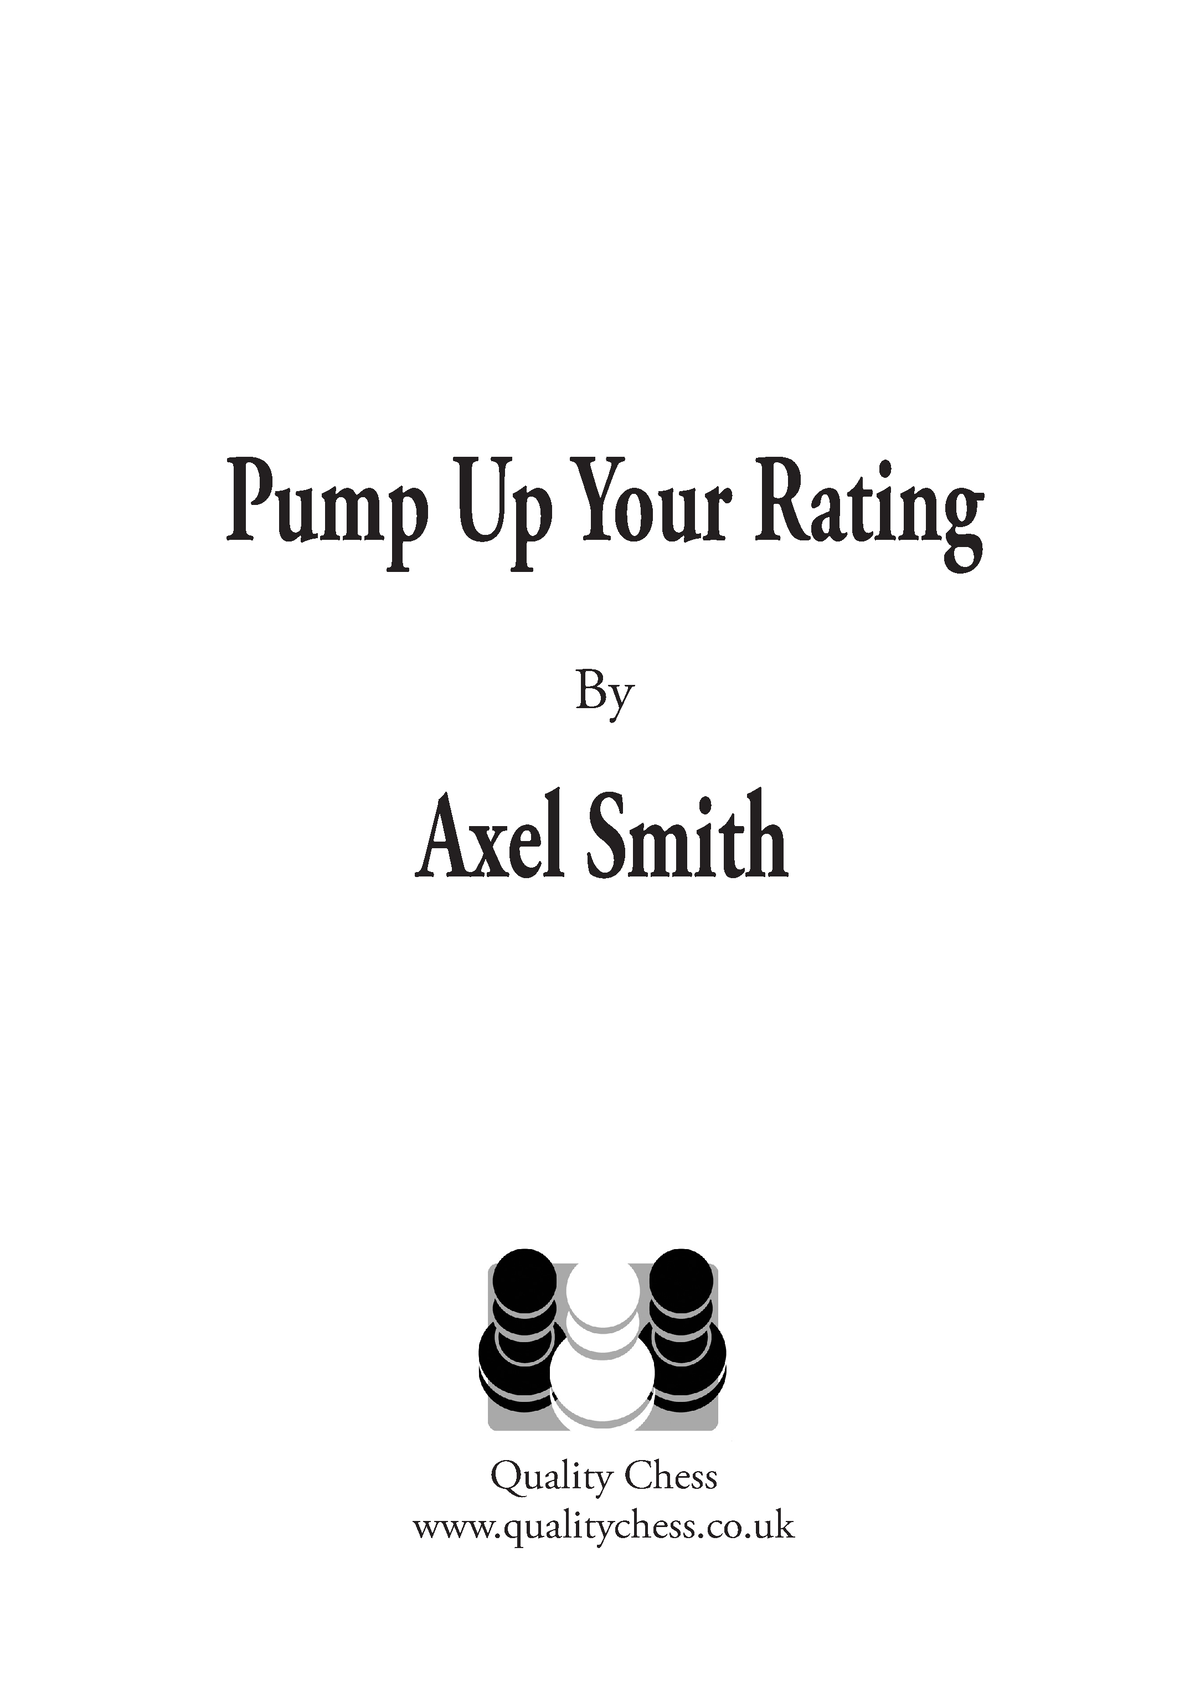 Pump Up Your Rating-excerpt - Pump Up Your Rating By Axel Smith Quality ...